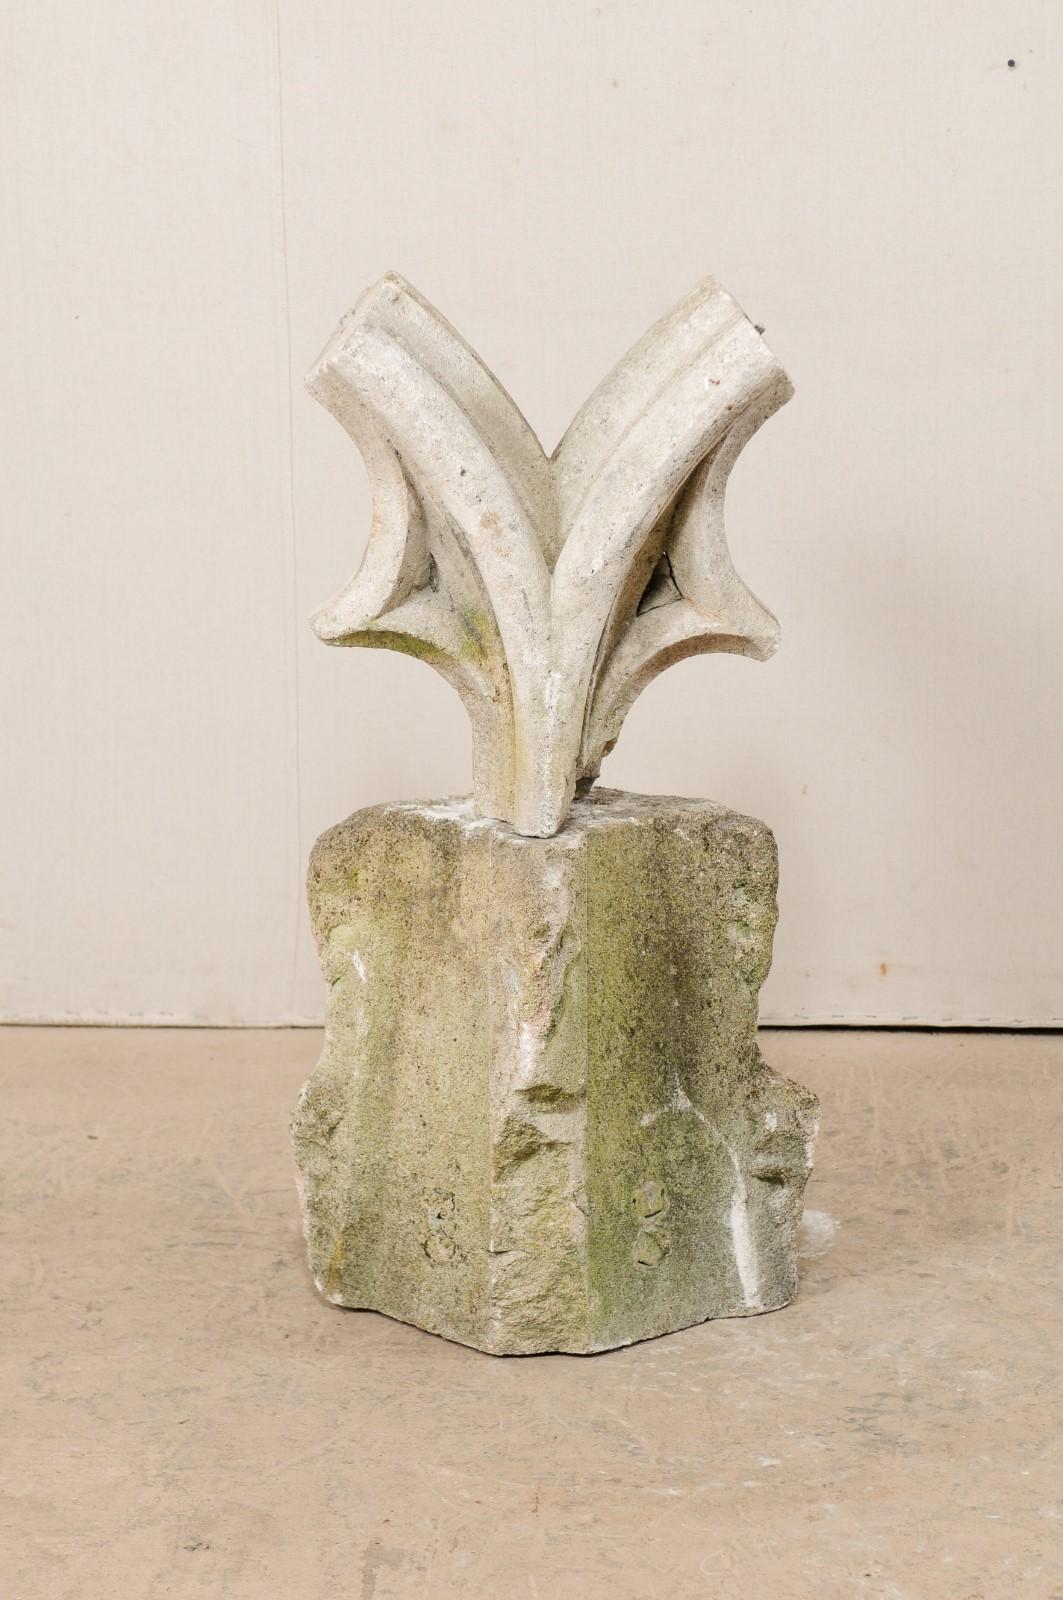 A French carved stone garden sculpture on pedestal from the 19th century, though potentially much older. This antique garden element from France features an abstract hand carved stone statue at top with deep v-Formations, which once was a part of a